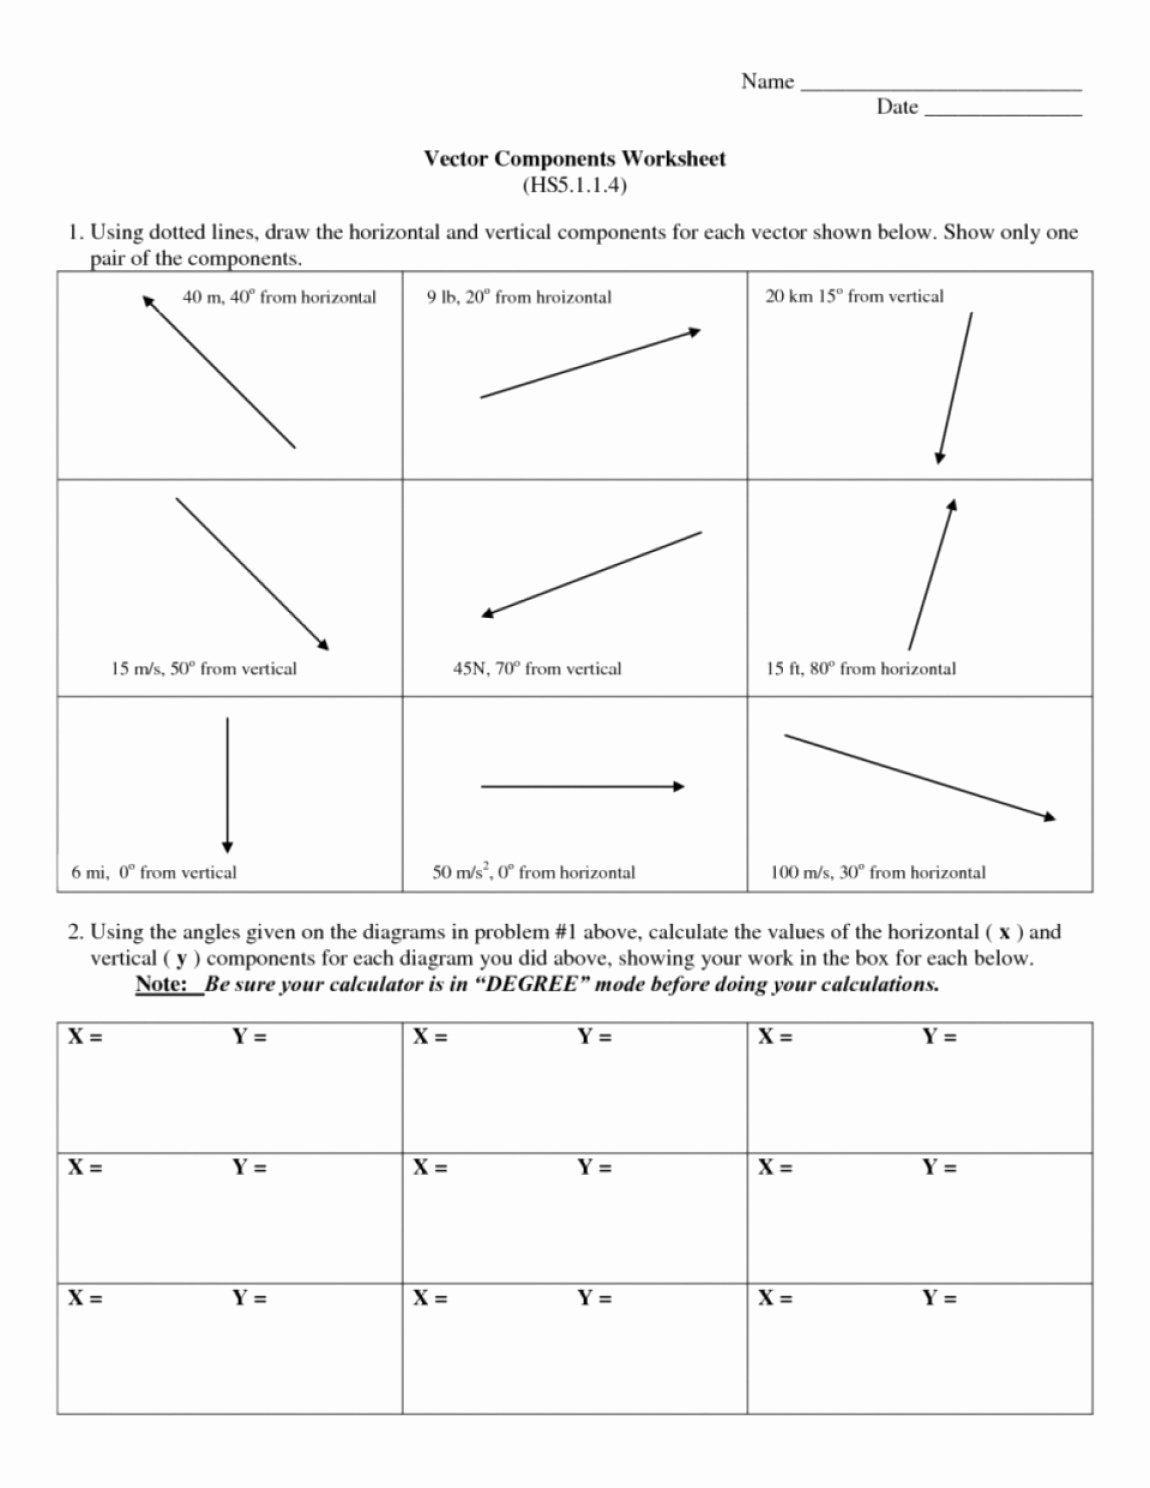 Vector Worksheet Physics Answers Inspirational Resultant Vector Worksheet with Answers